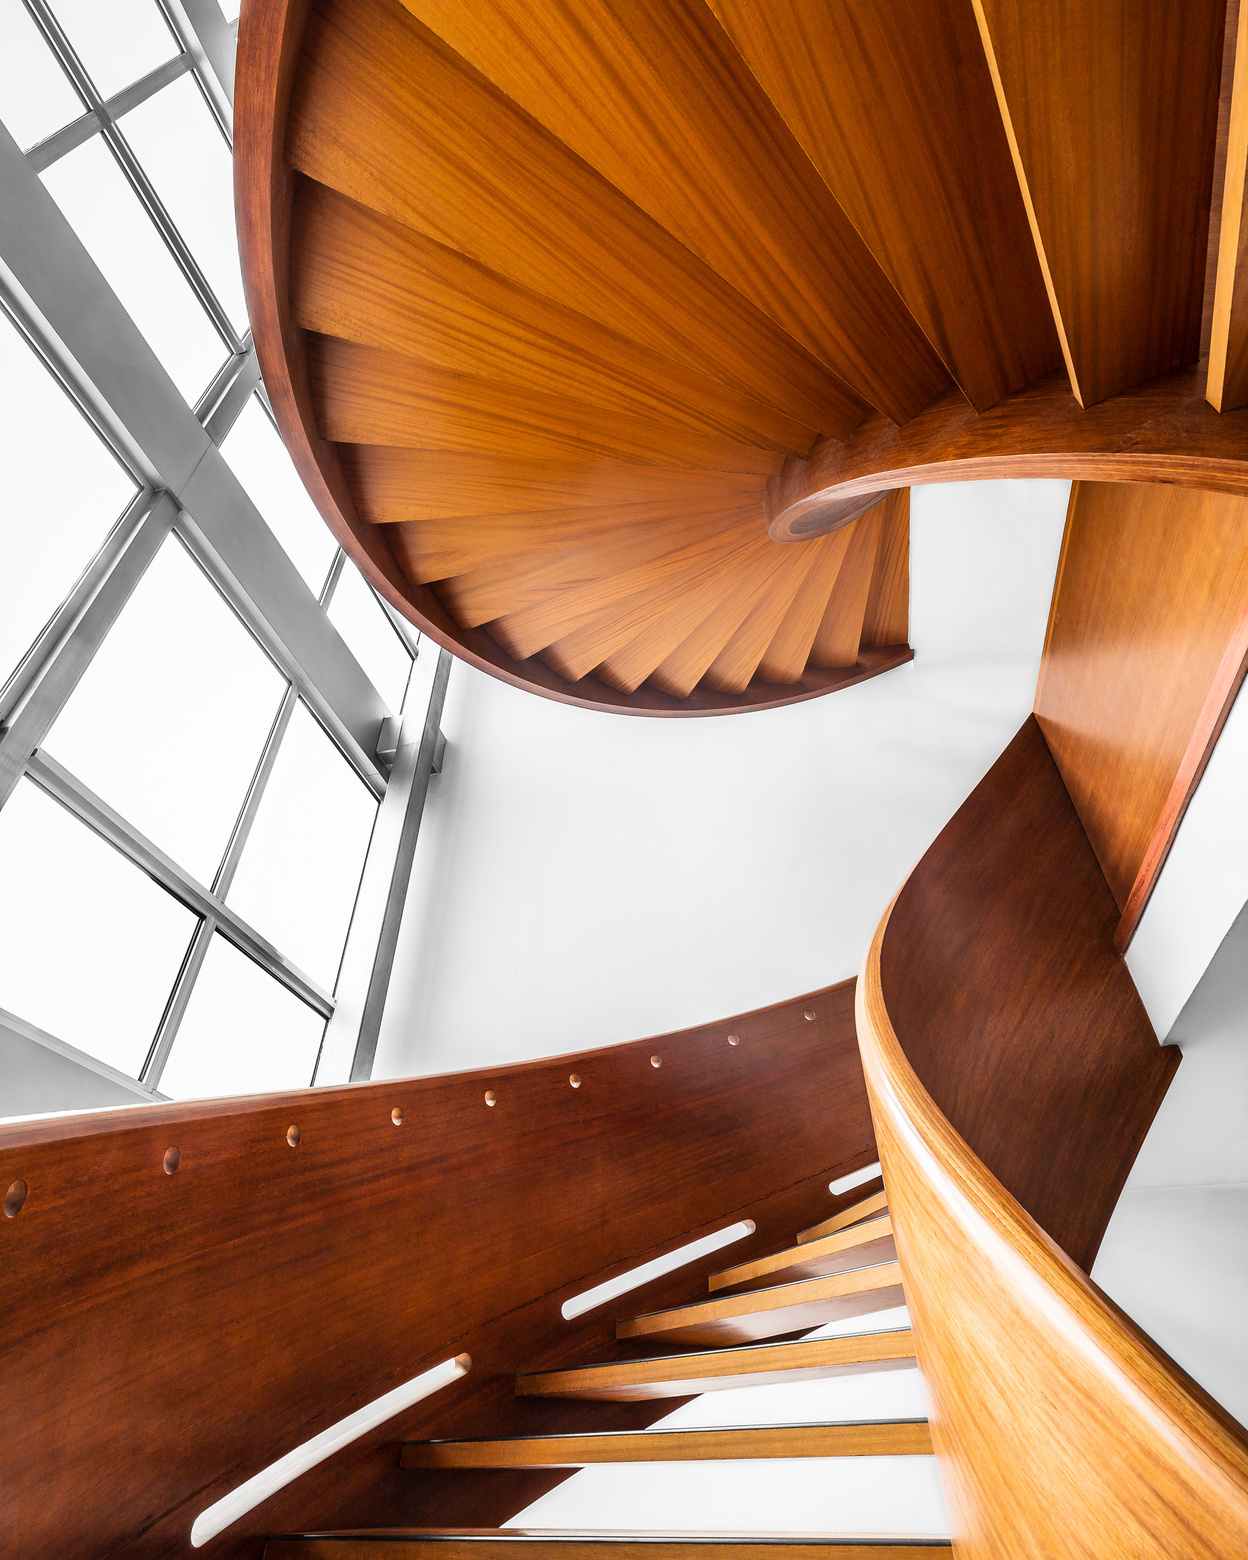 Architectural Photography of Brown Wooden Stairs